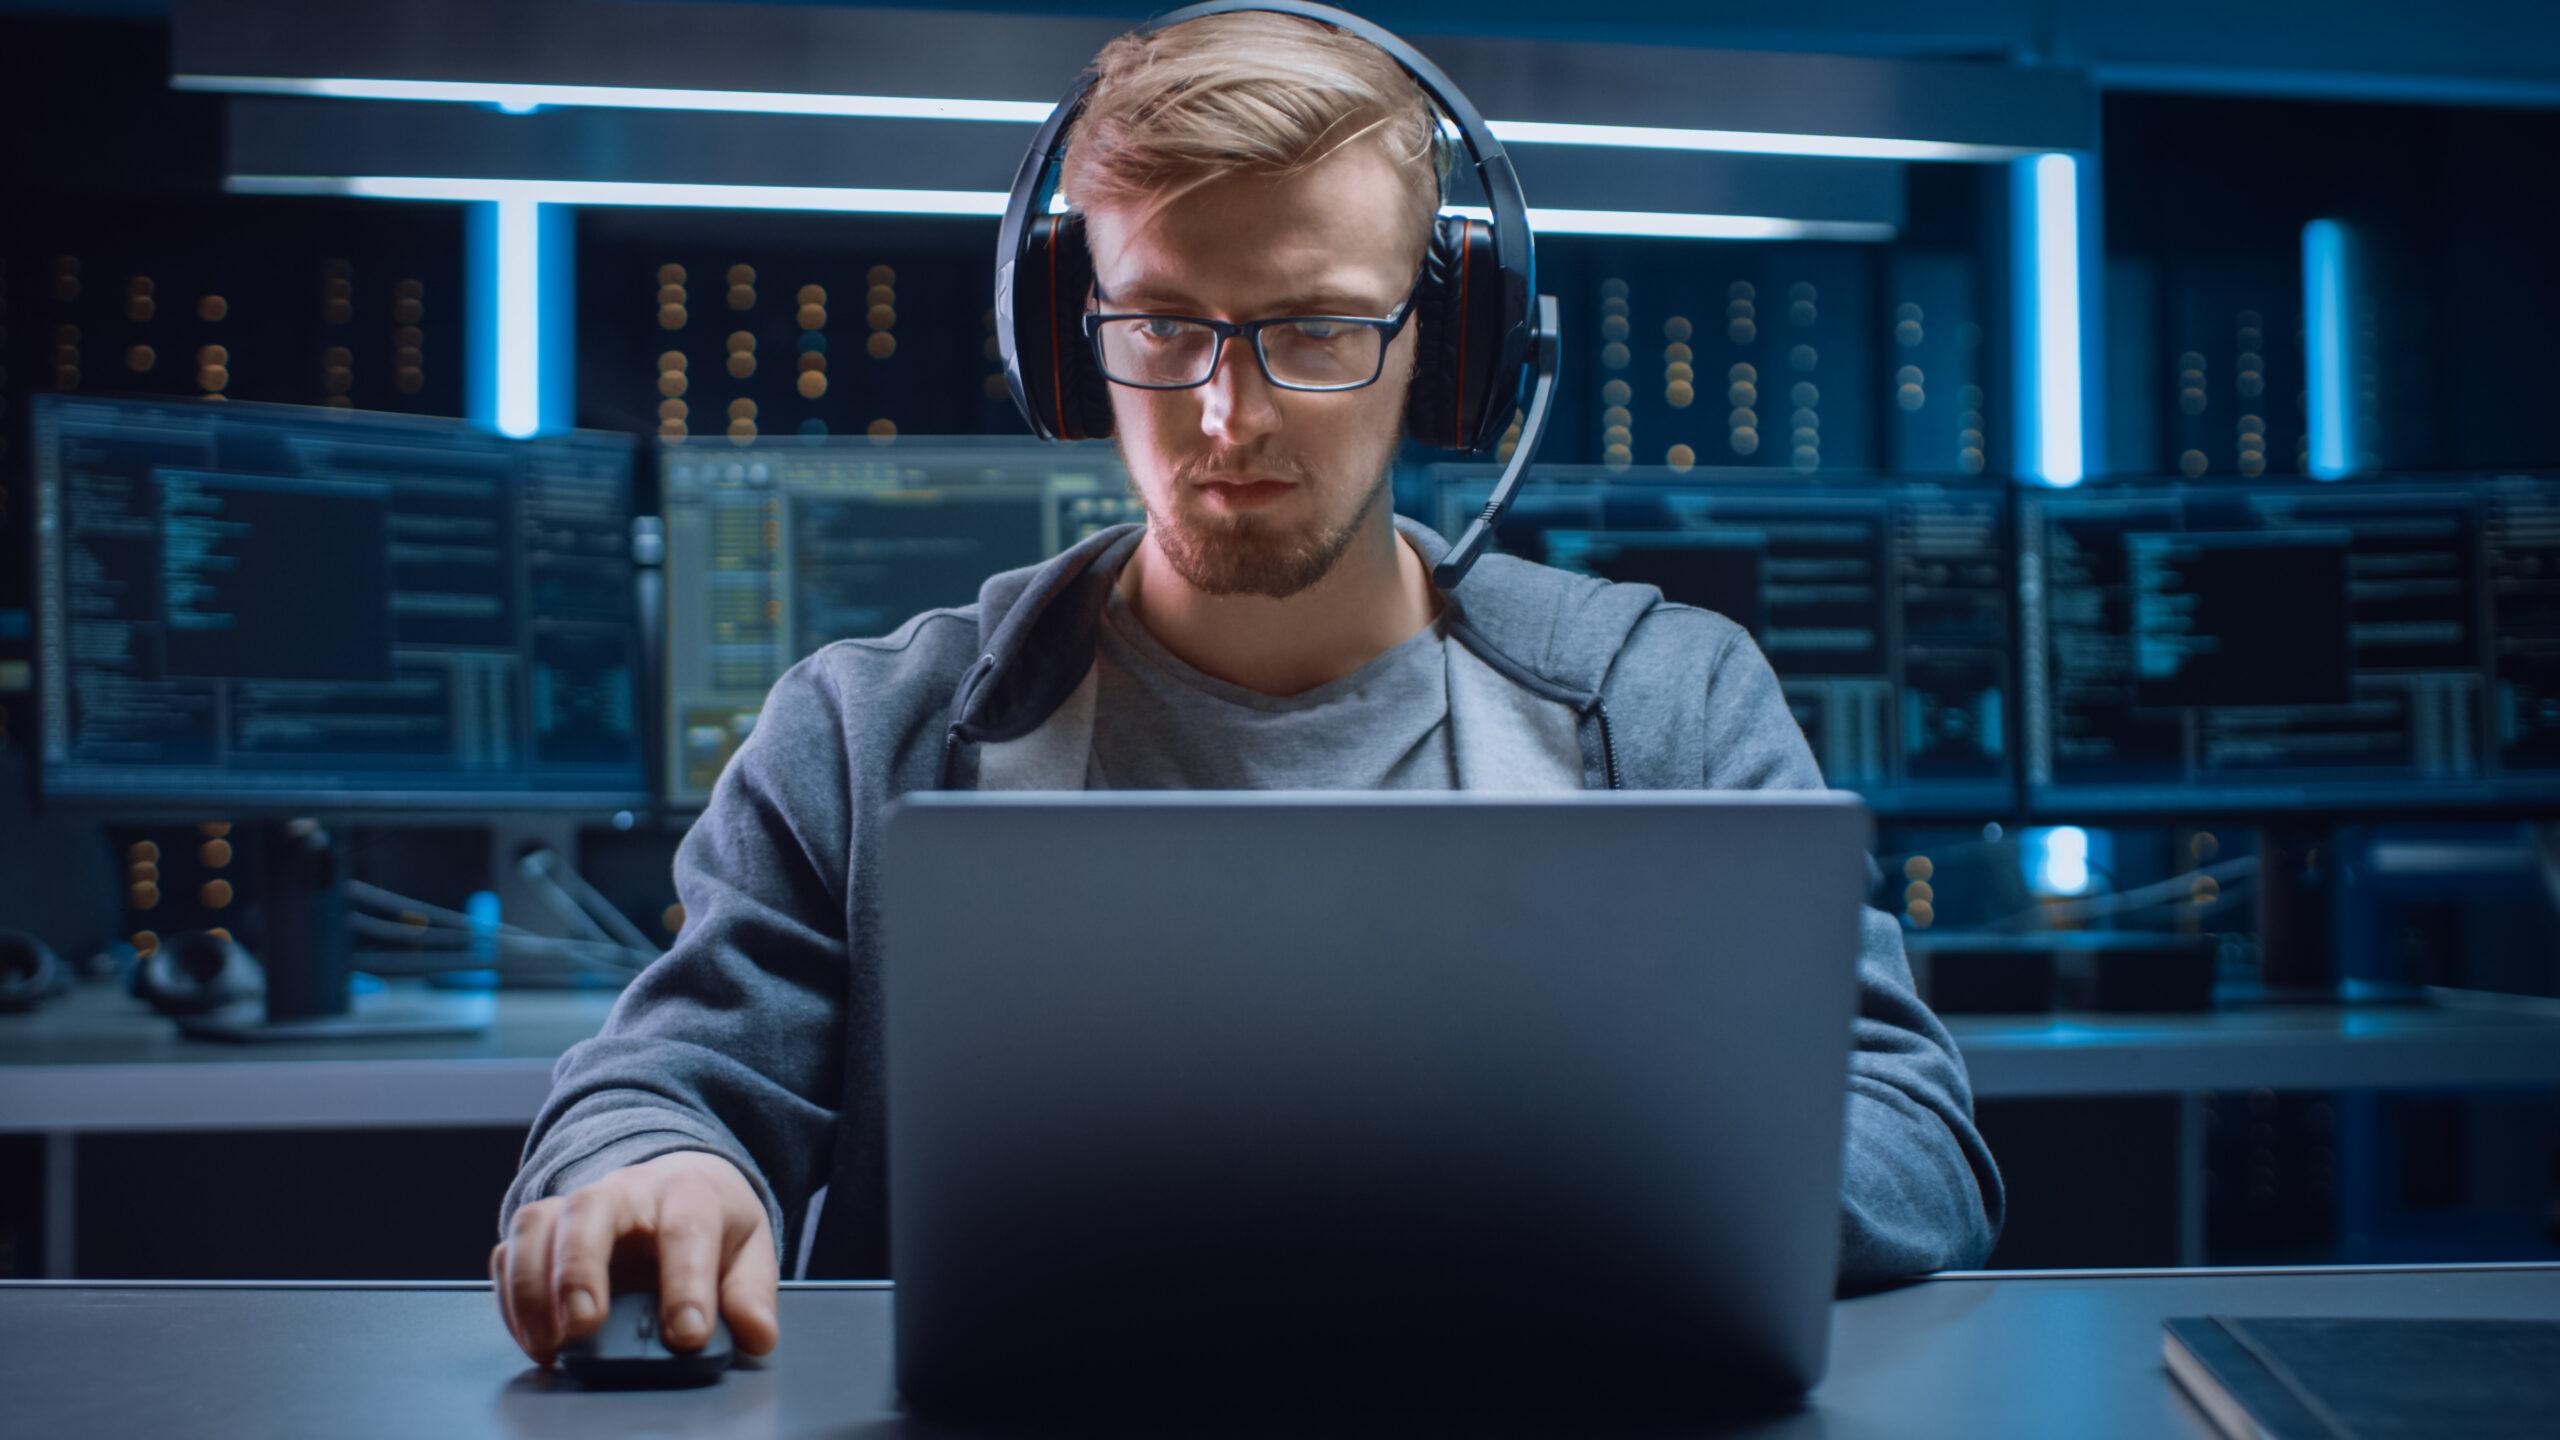 With servers behind him, programmer with glasses working on his computer 